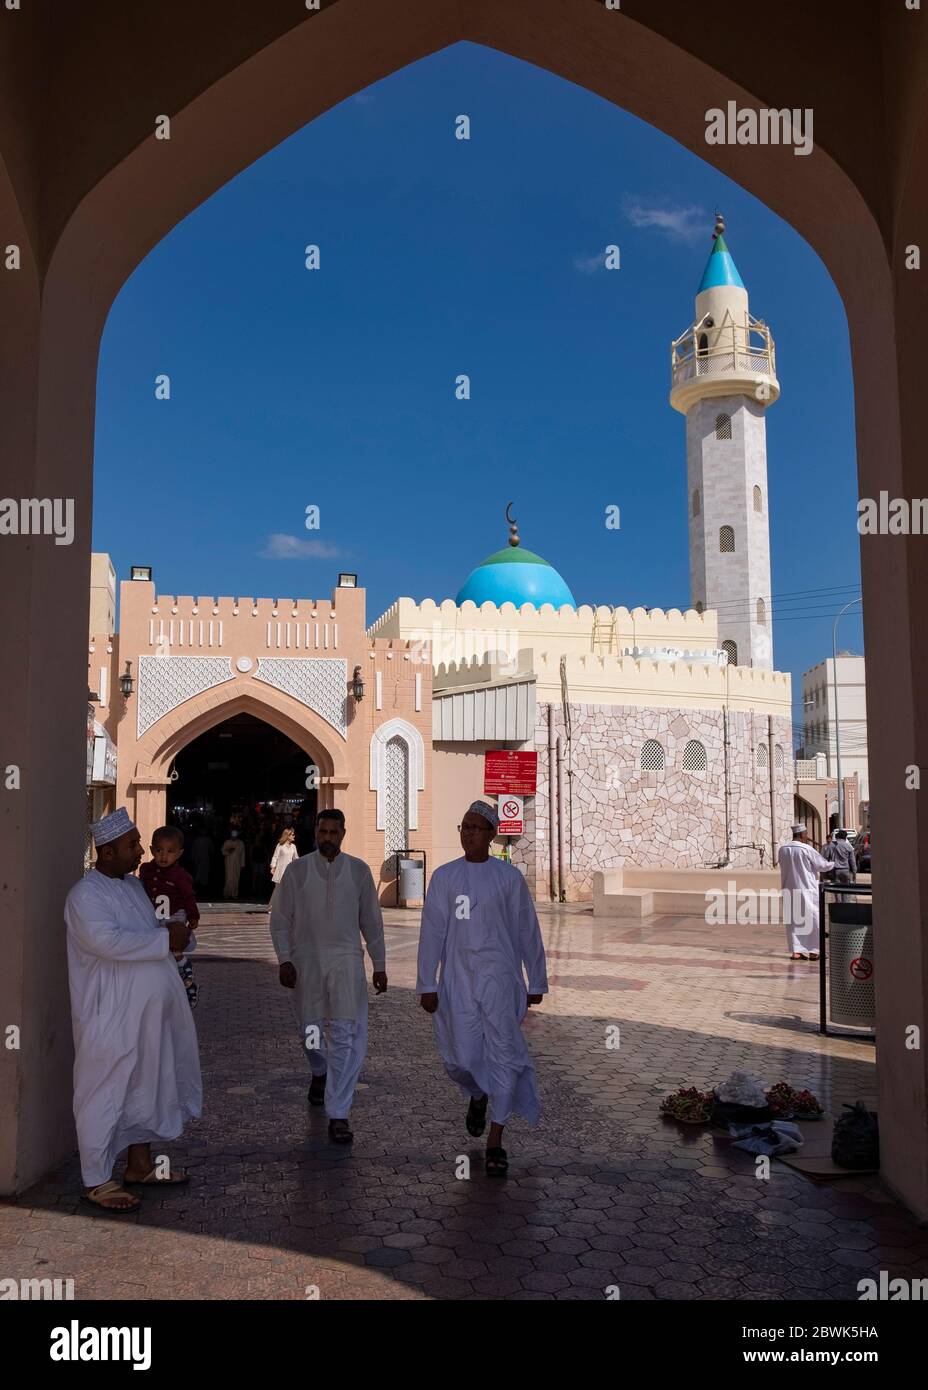 Entrance gate to the Mutrah Souq, Muscat, Sultanate of Oman Stock Photo